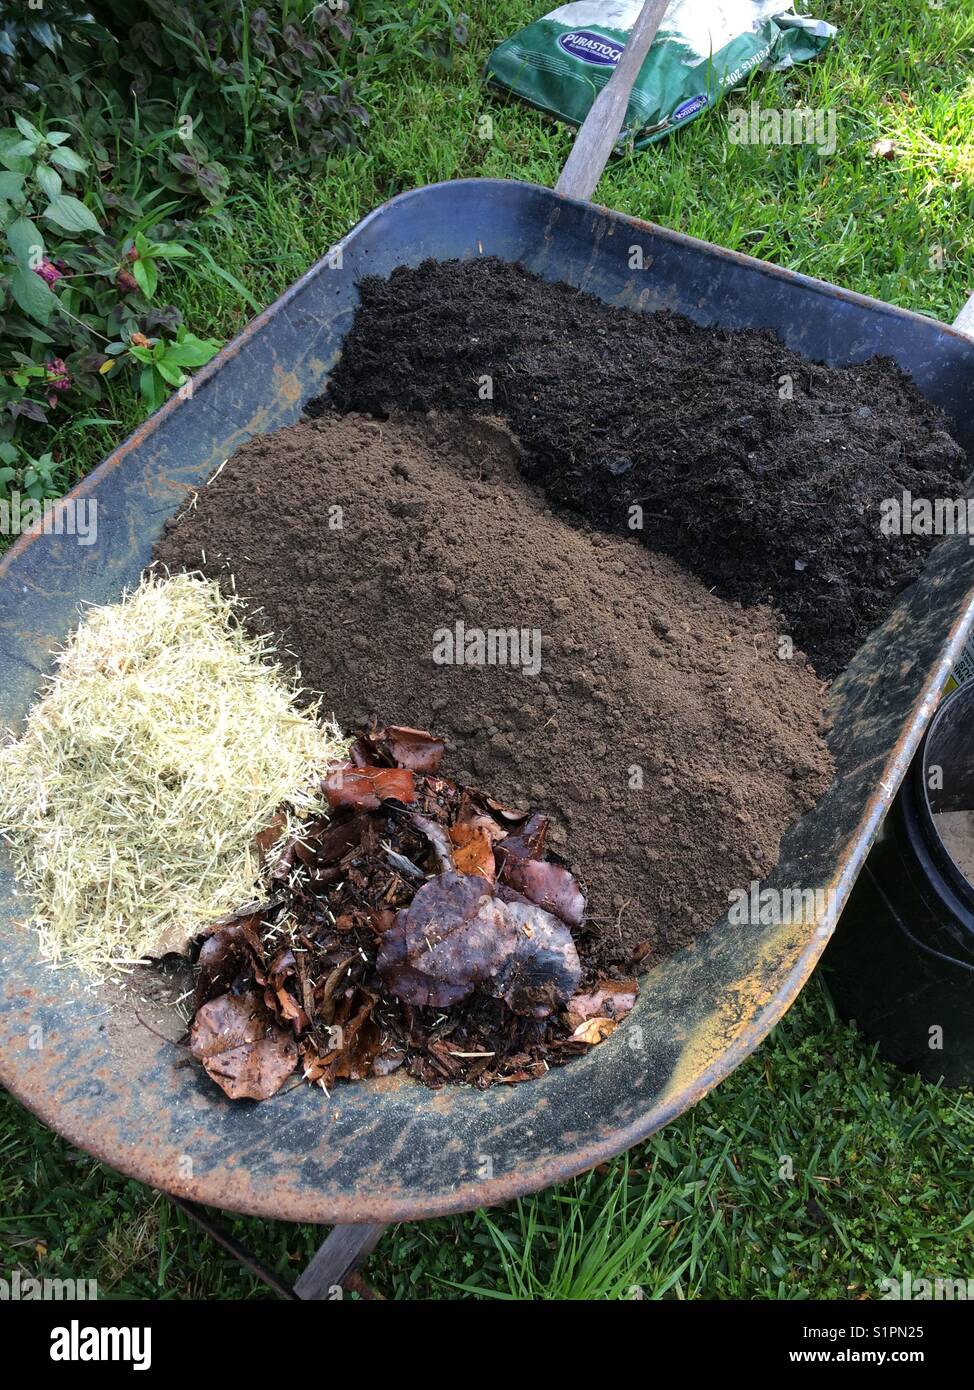 Making Garden Soil Mix In A Wheelbarrow With Compost Manure And